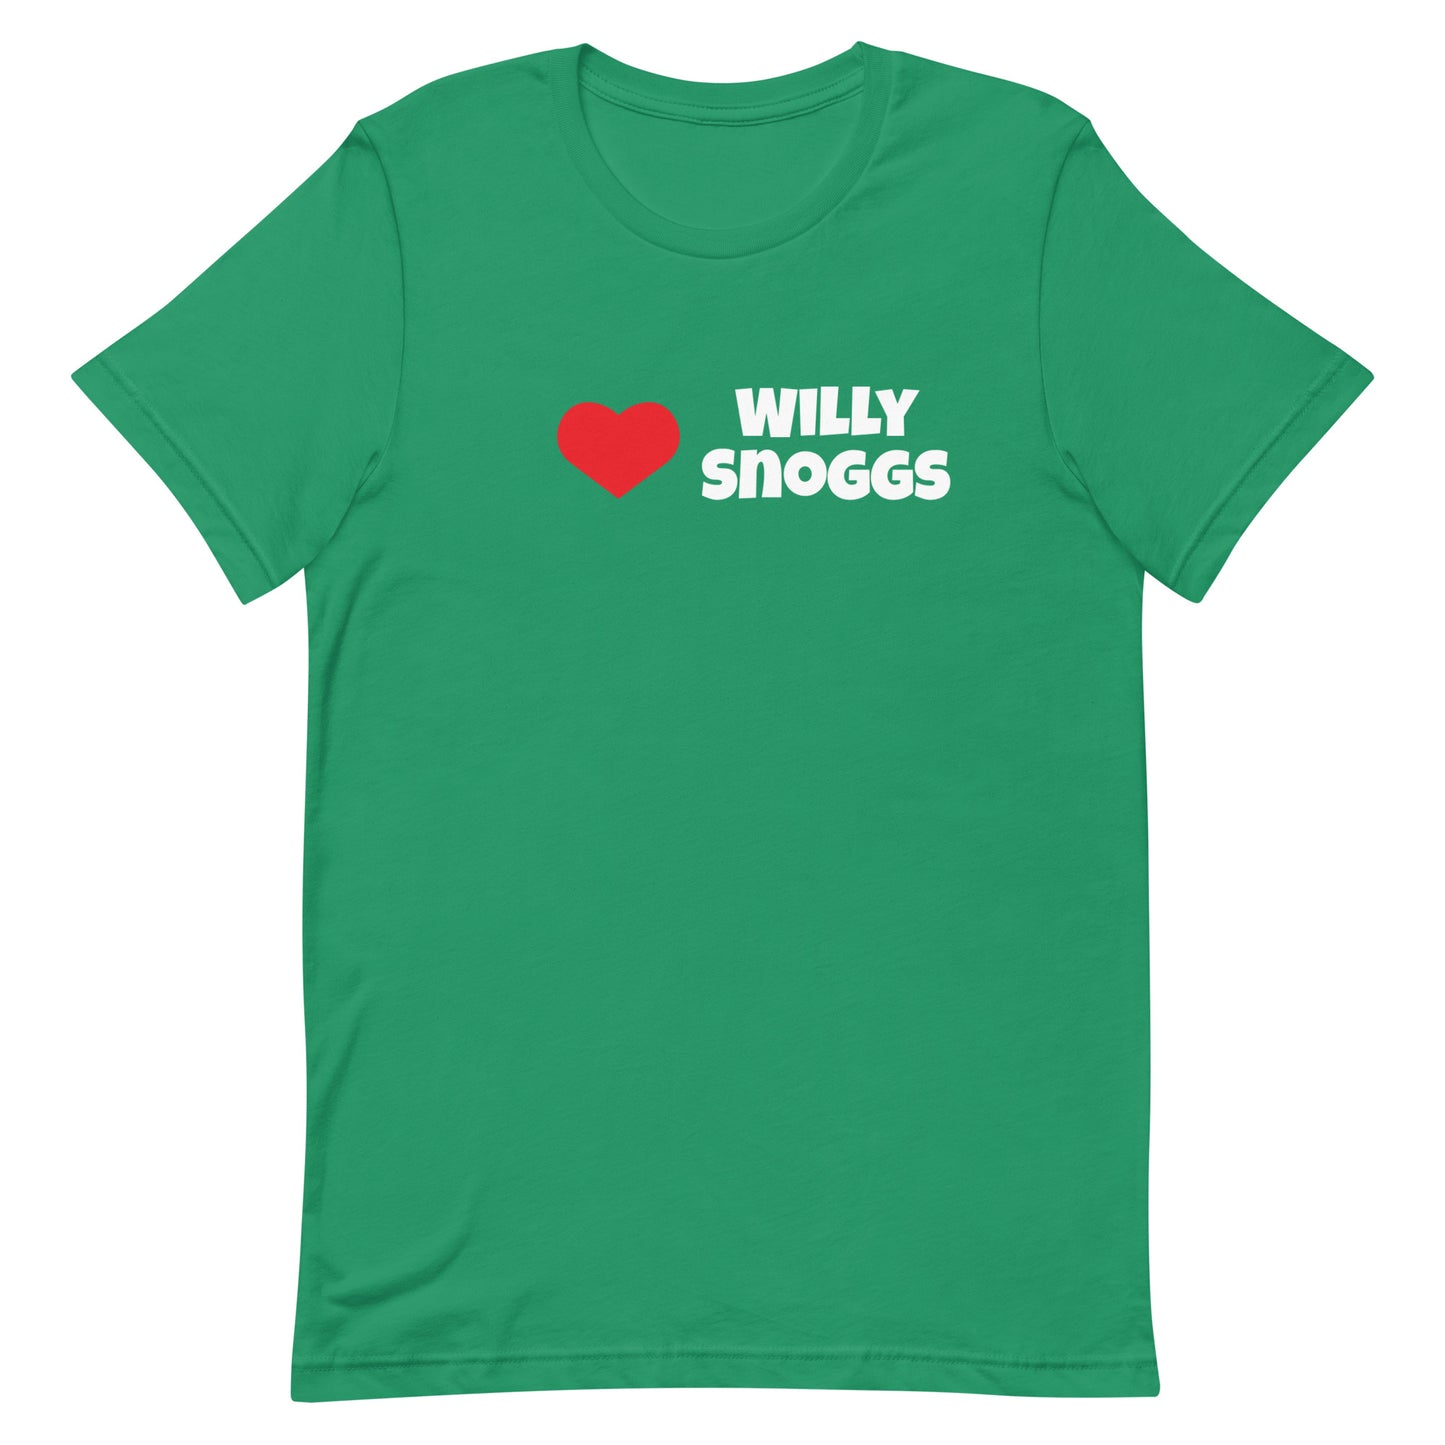 Love Willy Snoggs